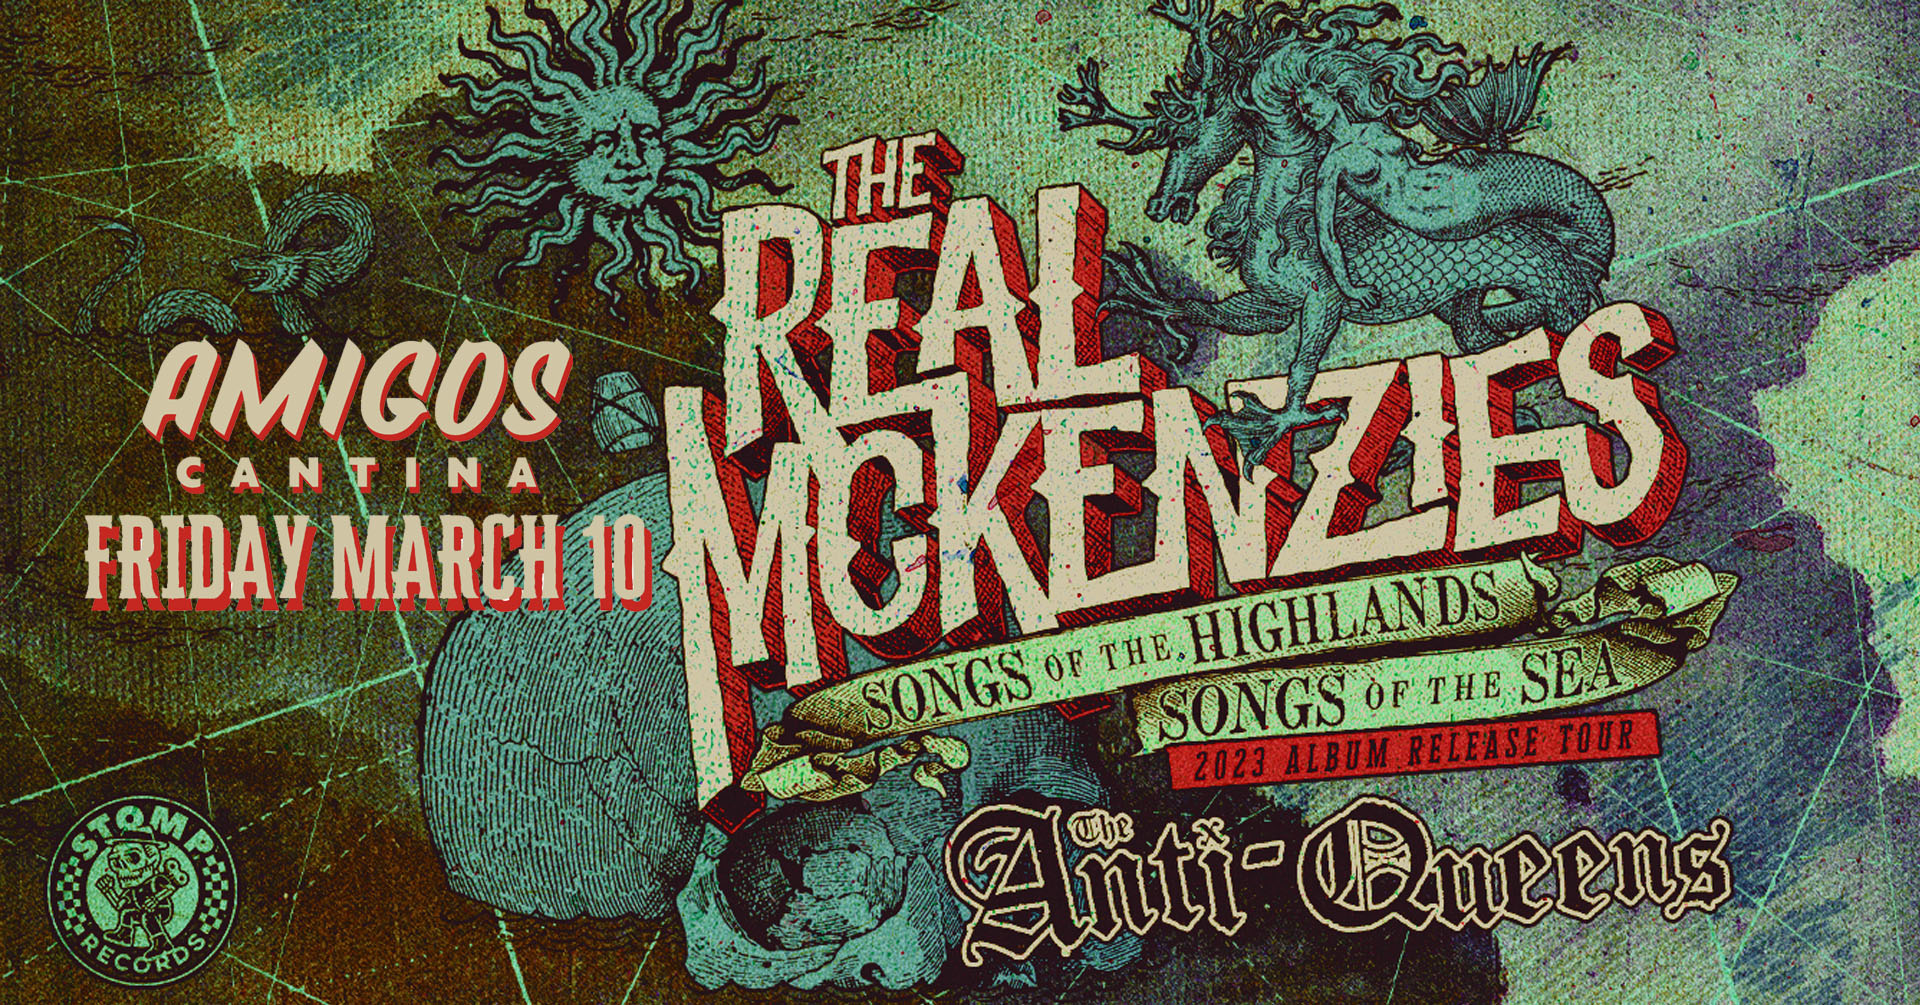 The Real McKenzies w/ The Anti-Queens